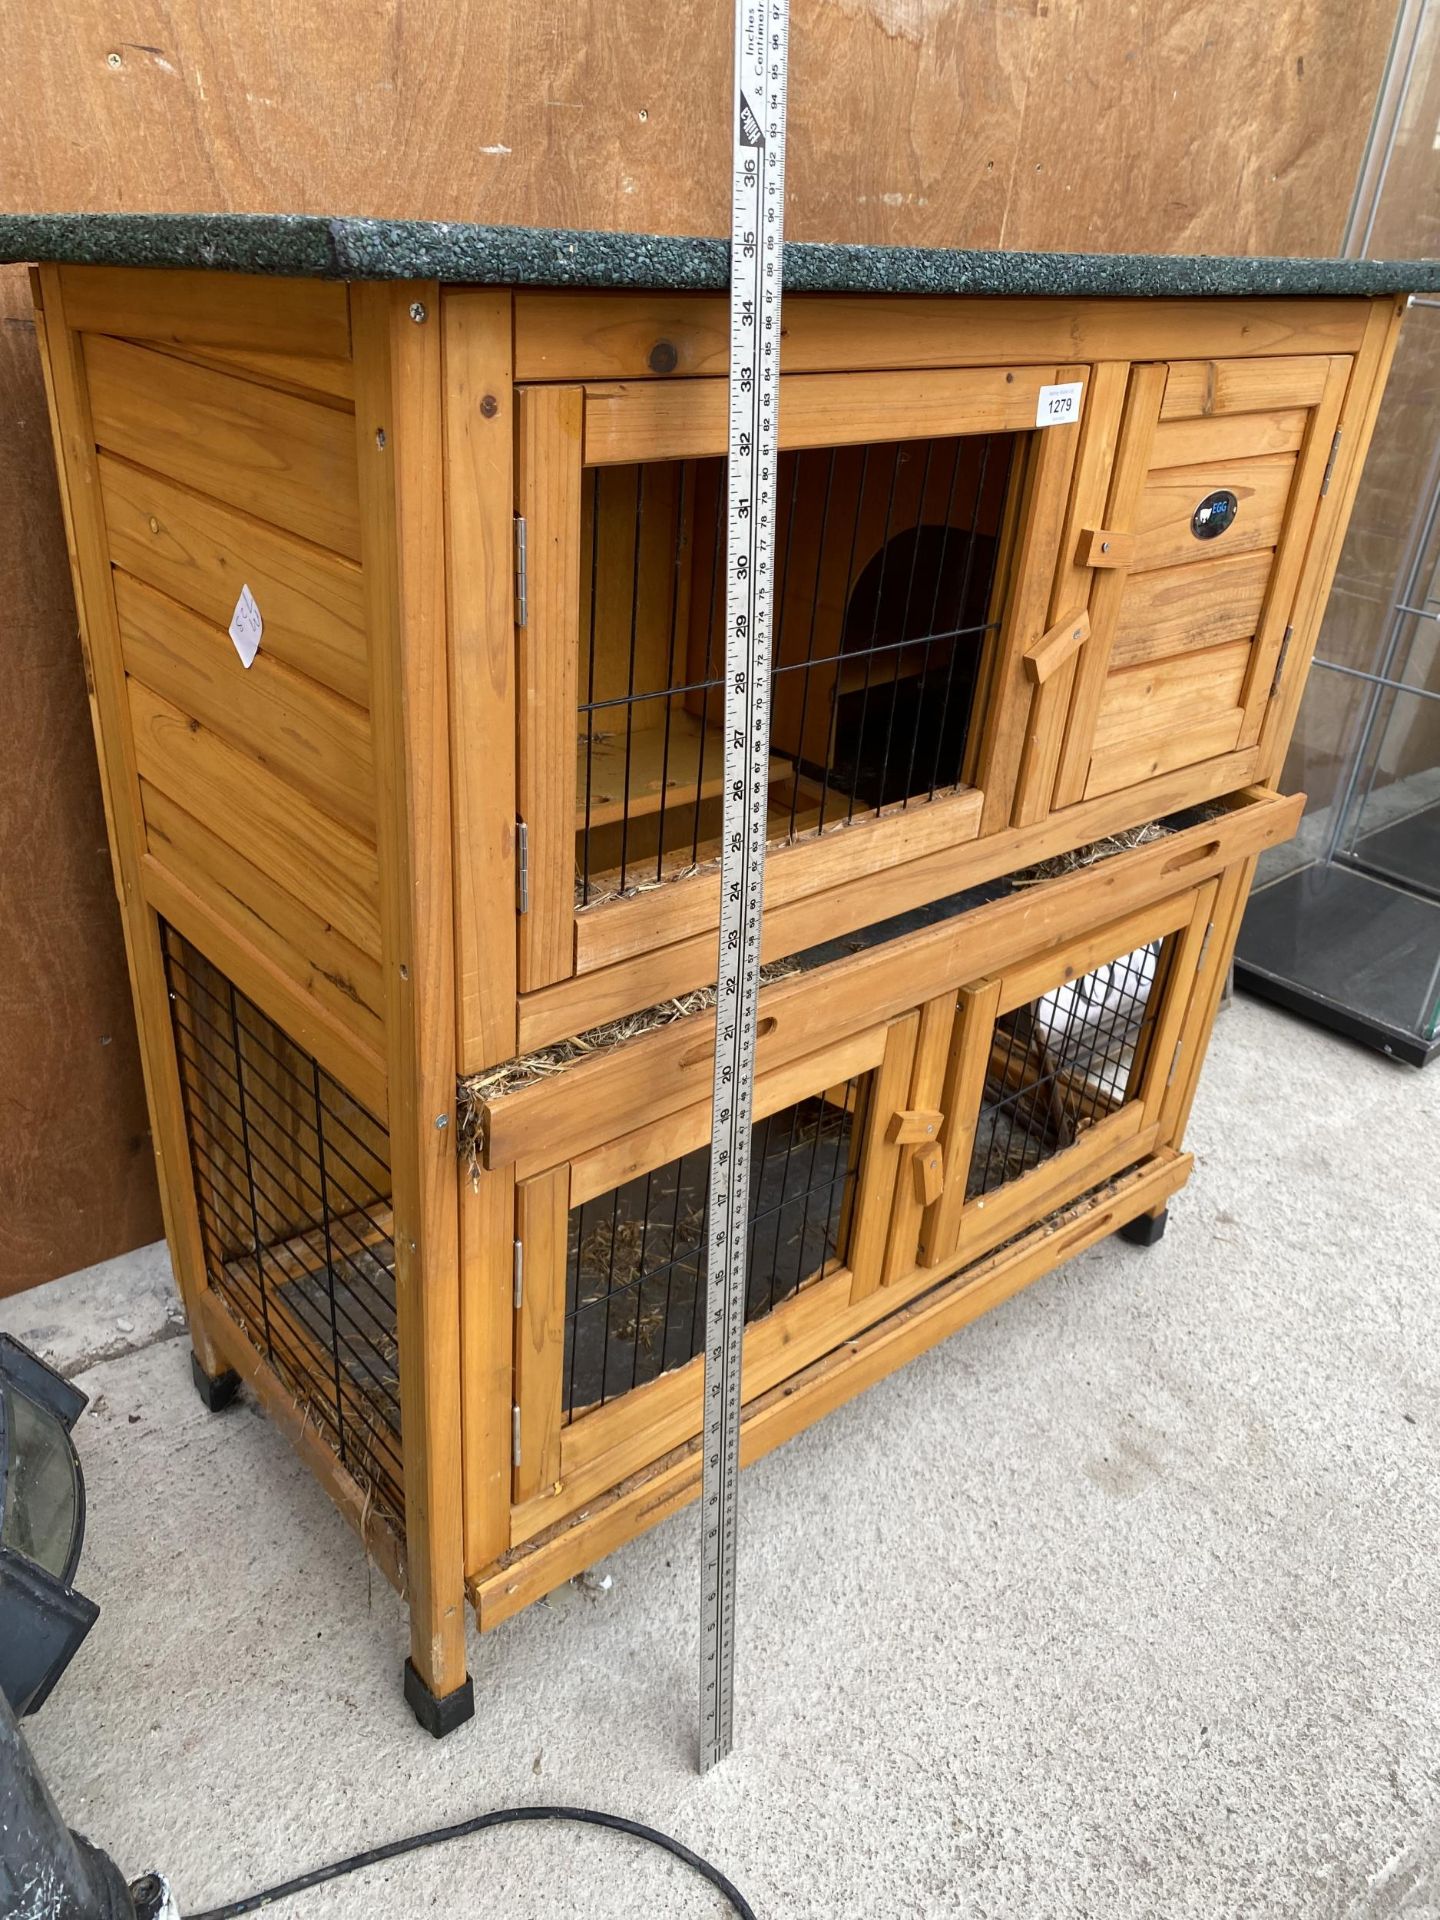 A WOODEN TWO TIER RABBIT HUTCH - Image 6 of 6